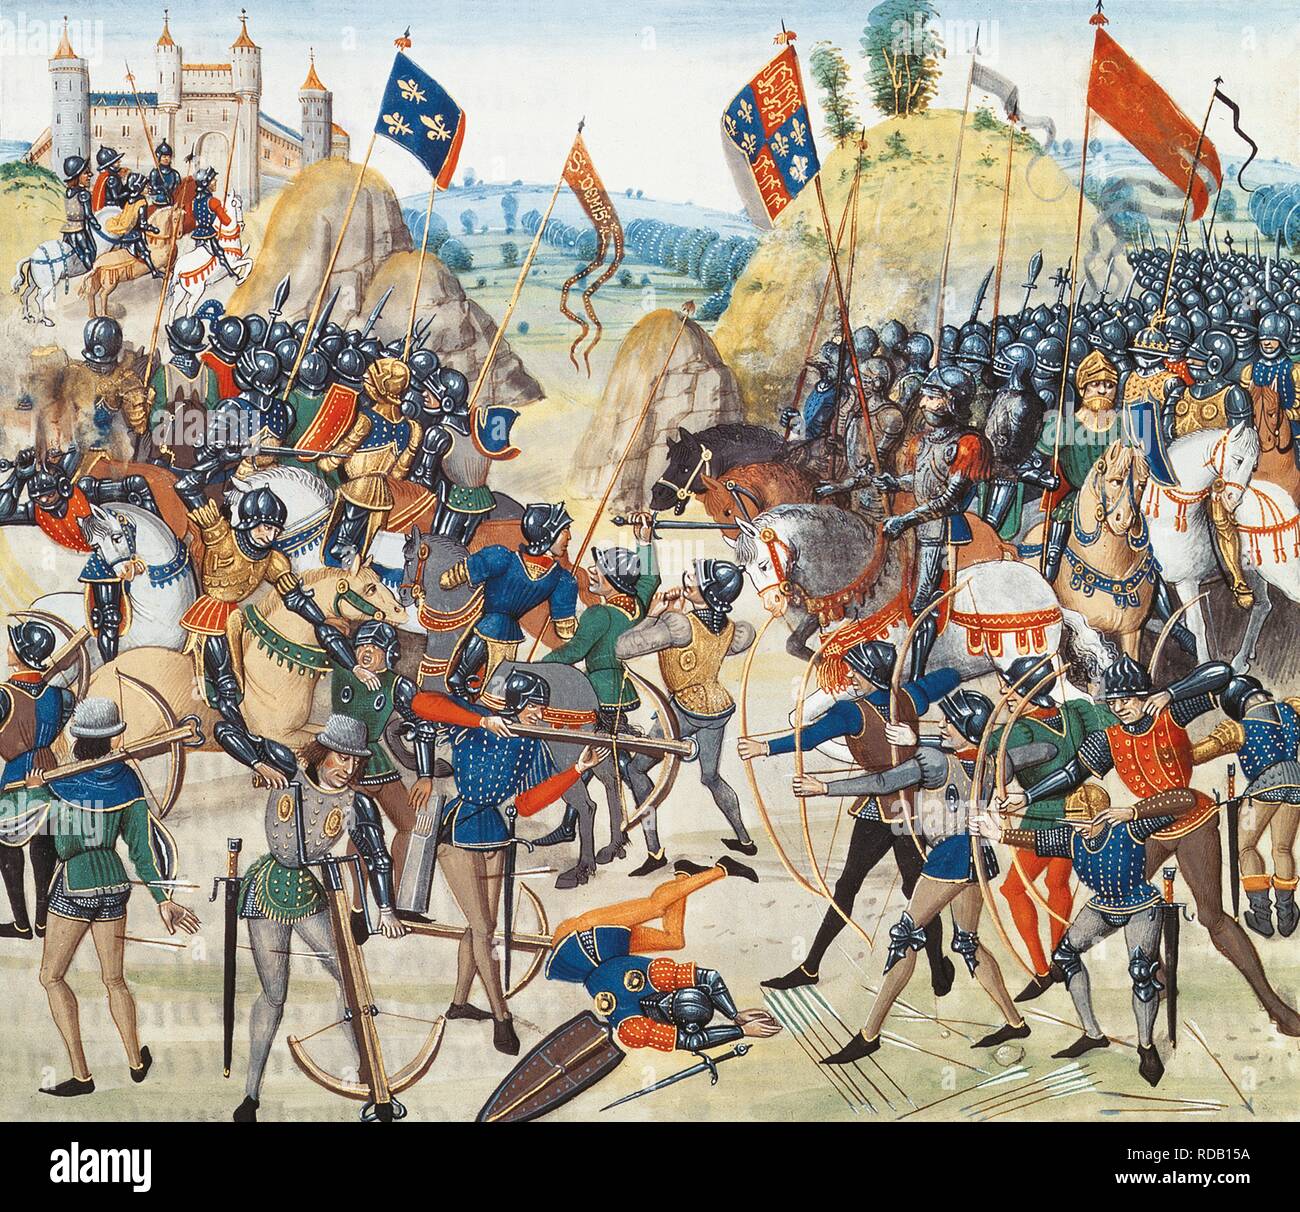 The Battle of Crécy on 26 August 1346 (Miniature from the Grandes Chroniques de France by Jean Froissart). Museum: BIBLIOTHEQUE NATIONALE DE FRANCE. Author: ANONYMOUS. Stock Photo